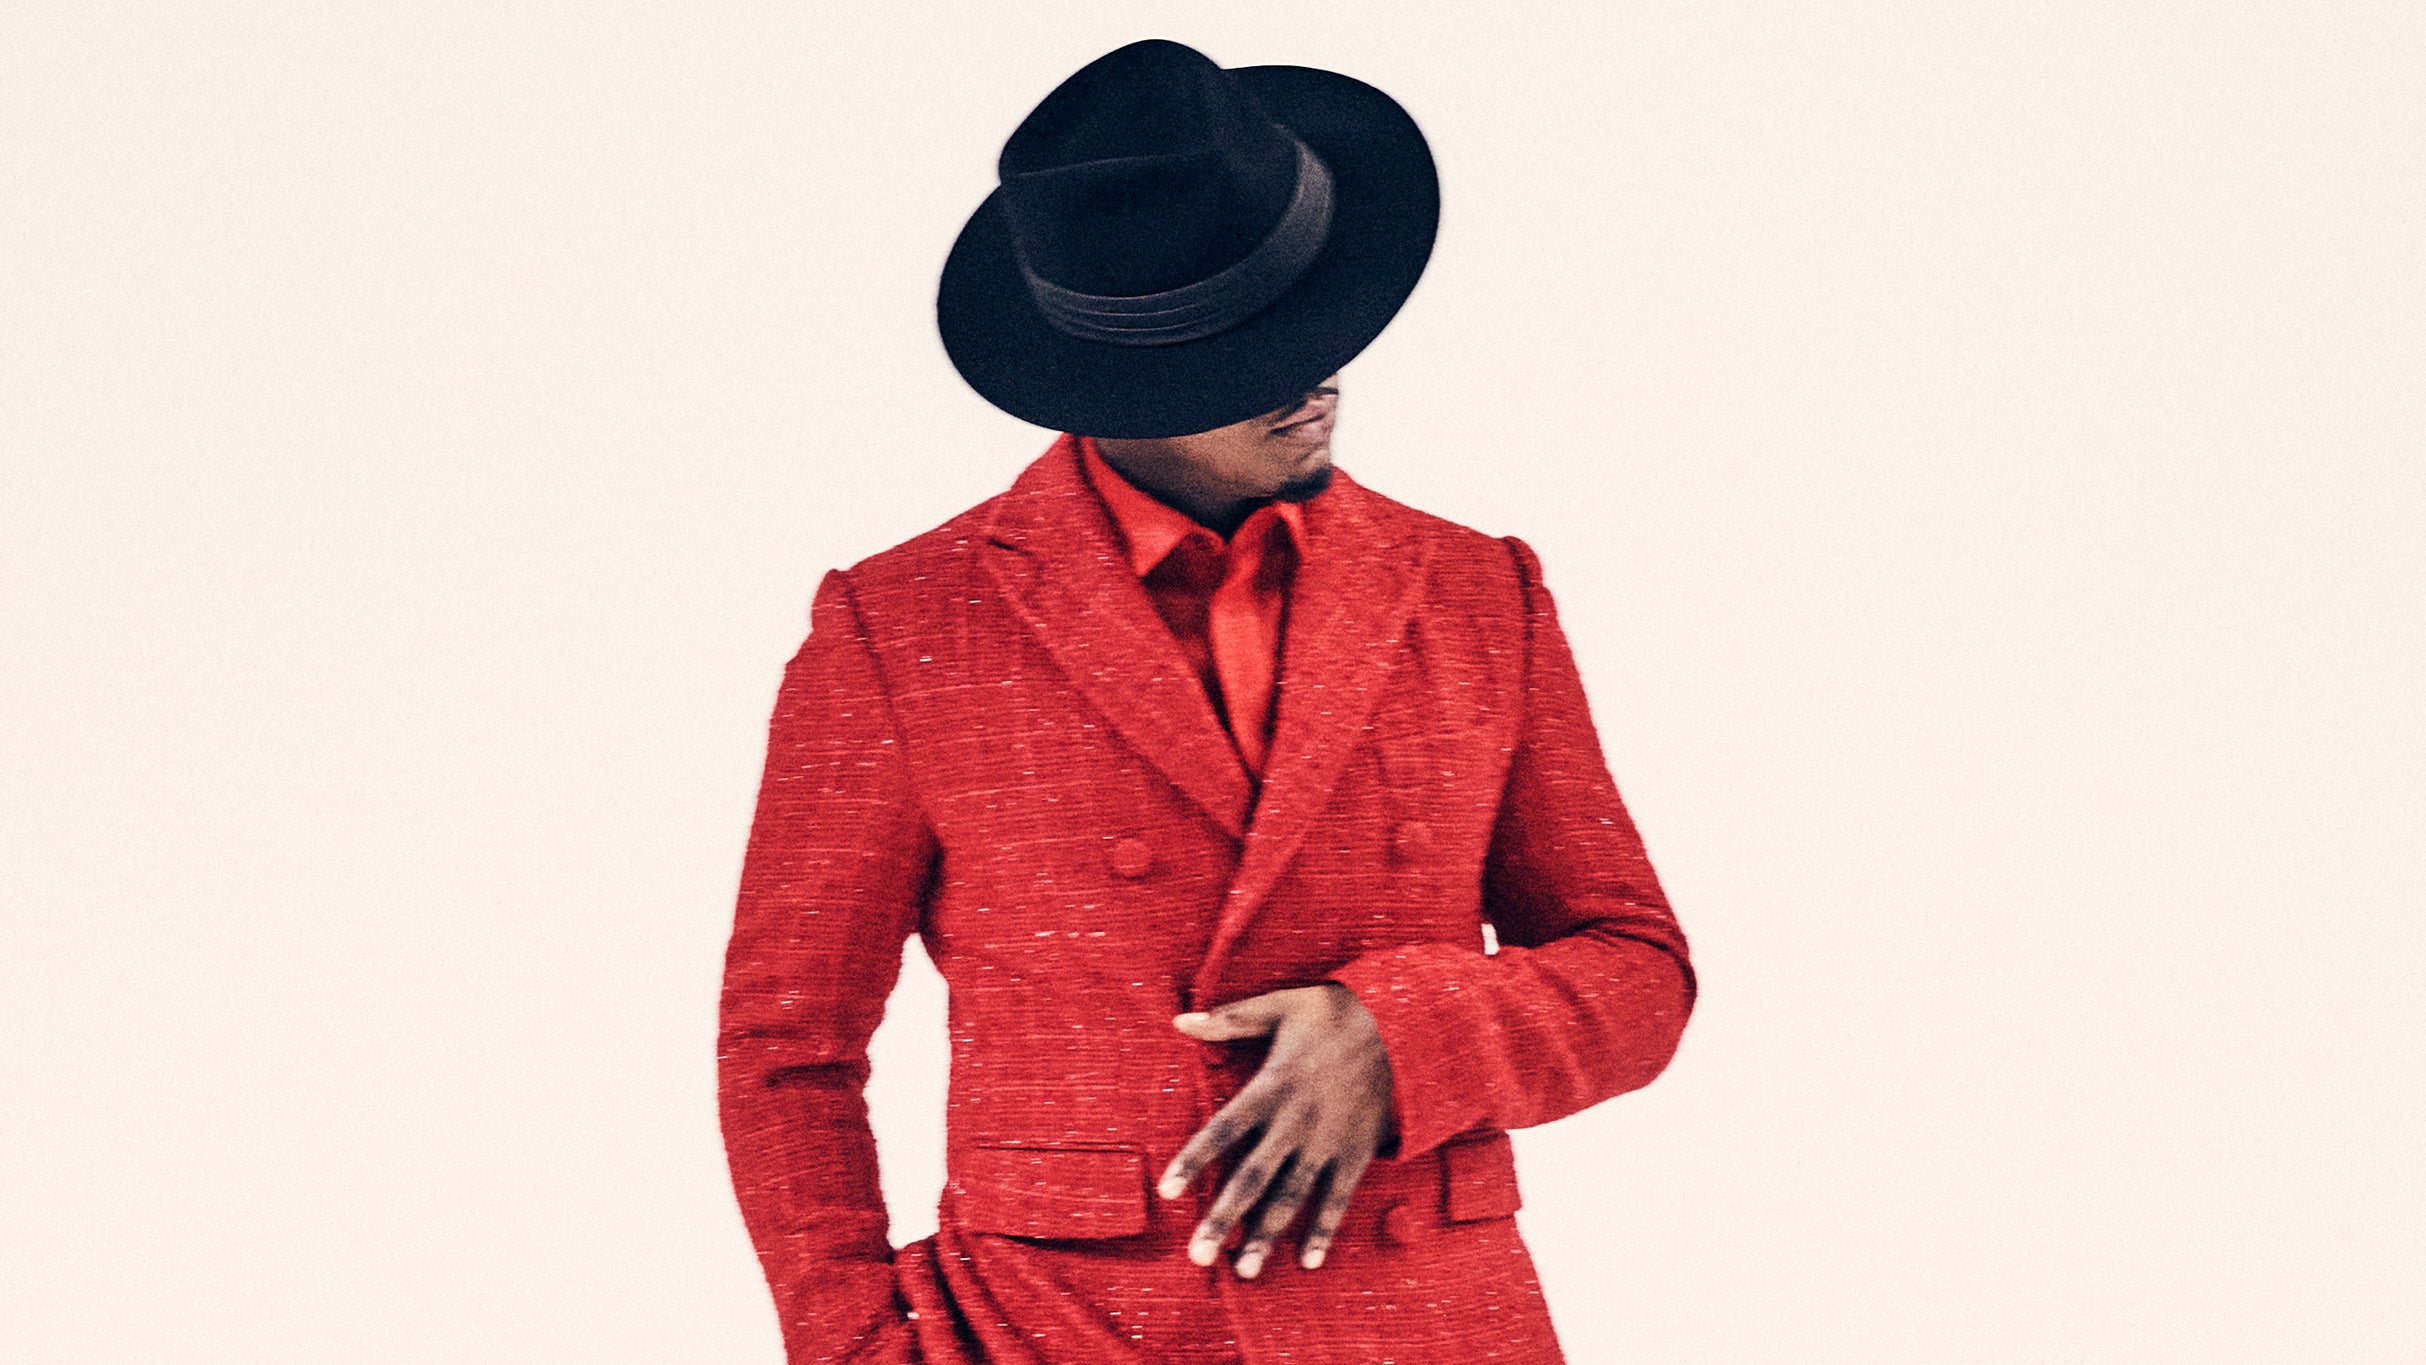 NE-YO: Champagne and Roses Tour with Mario and Pleasure P